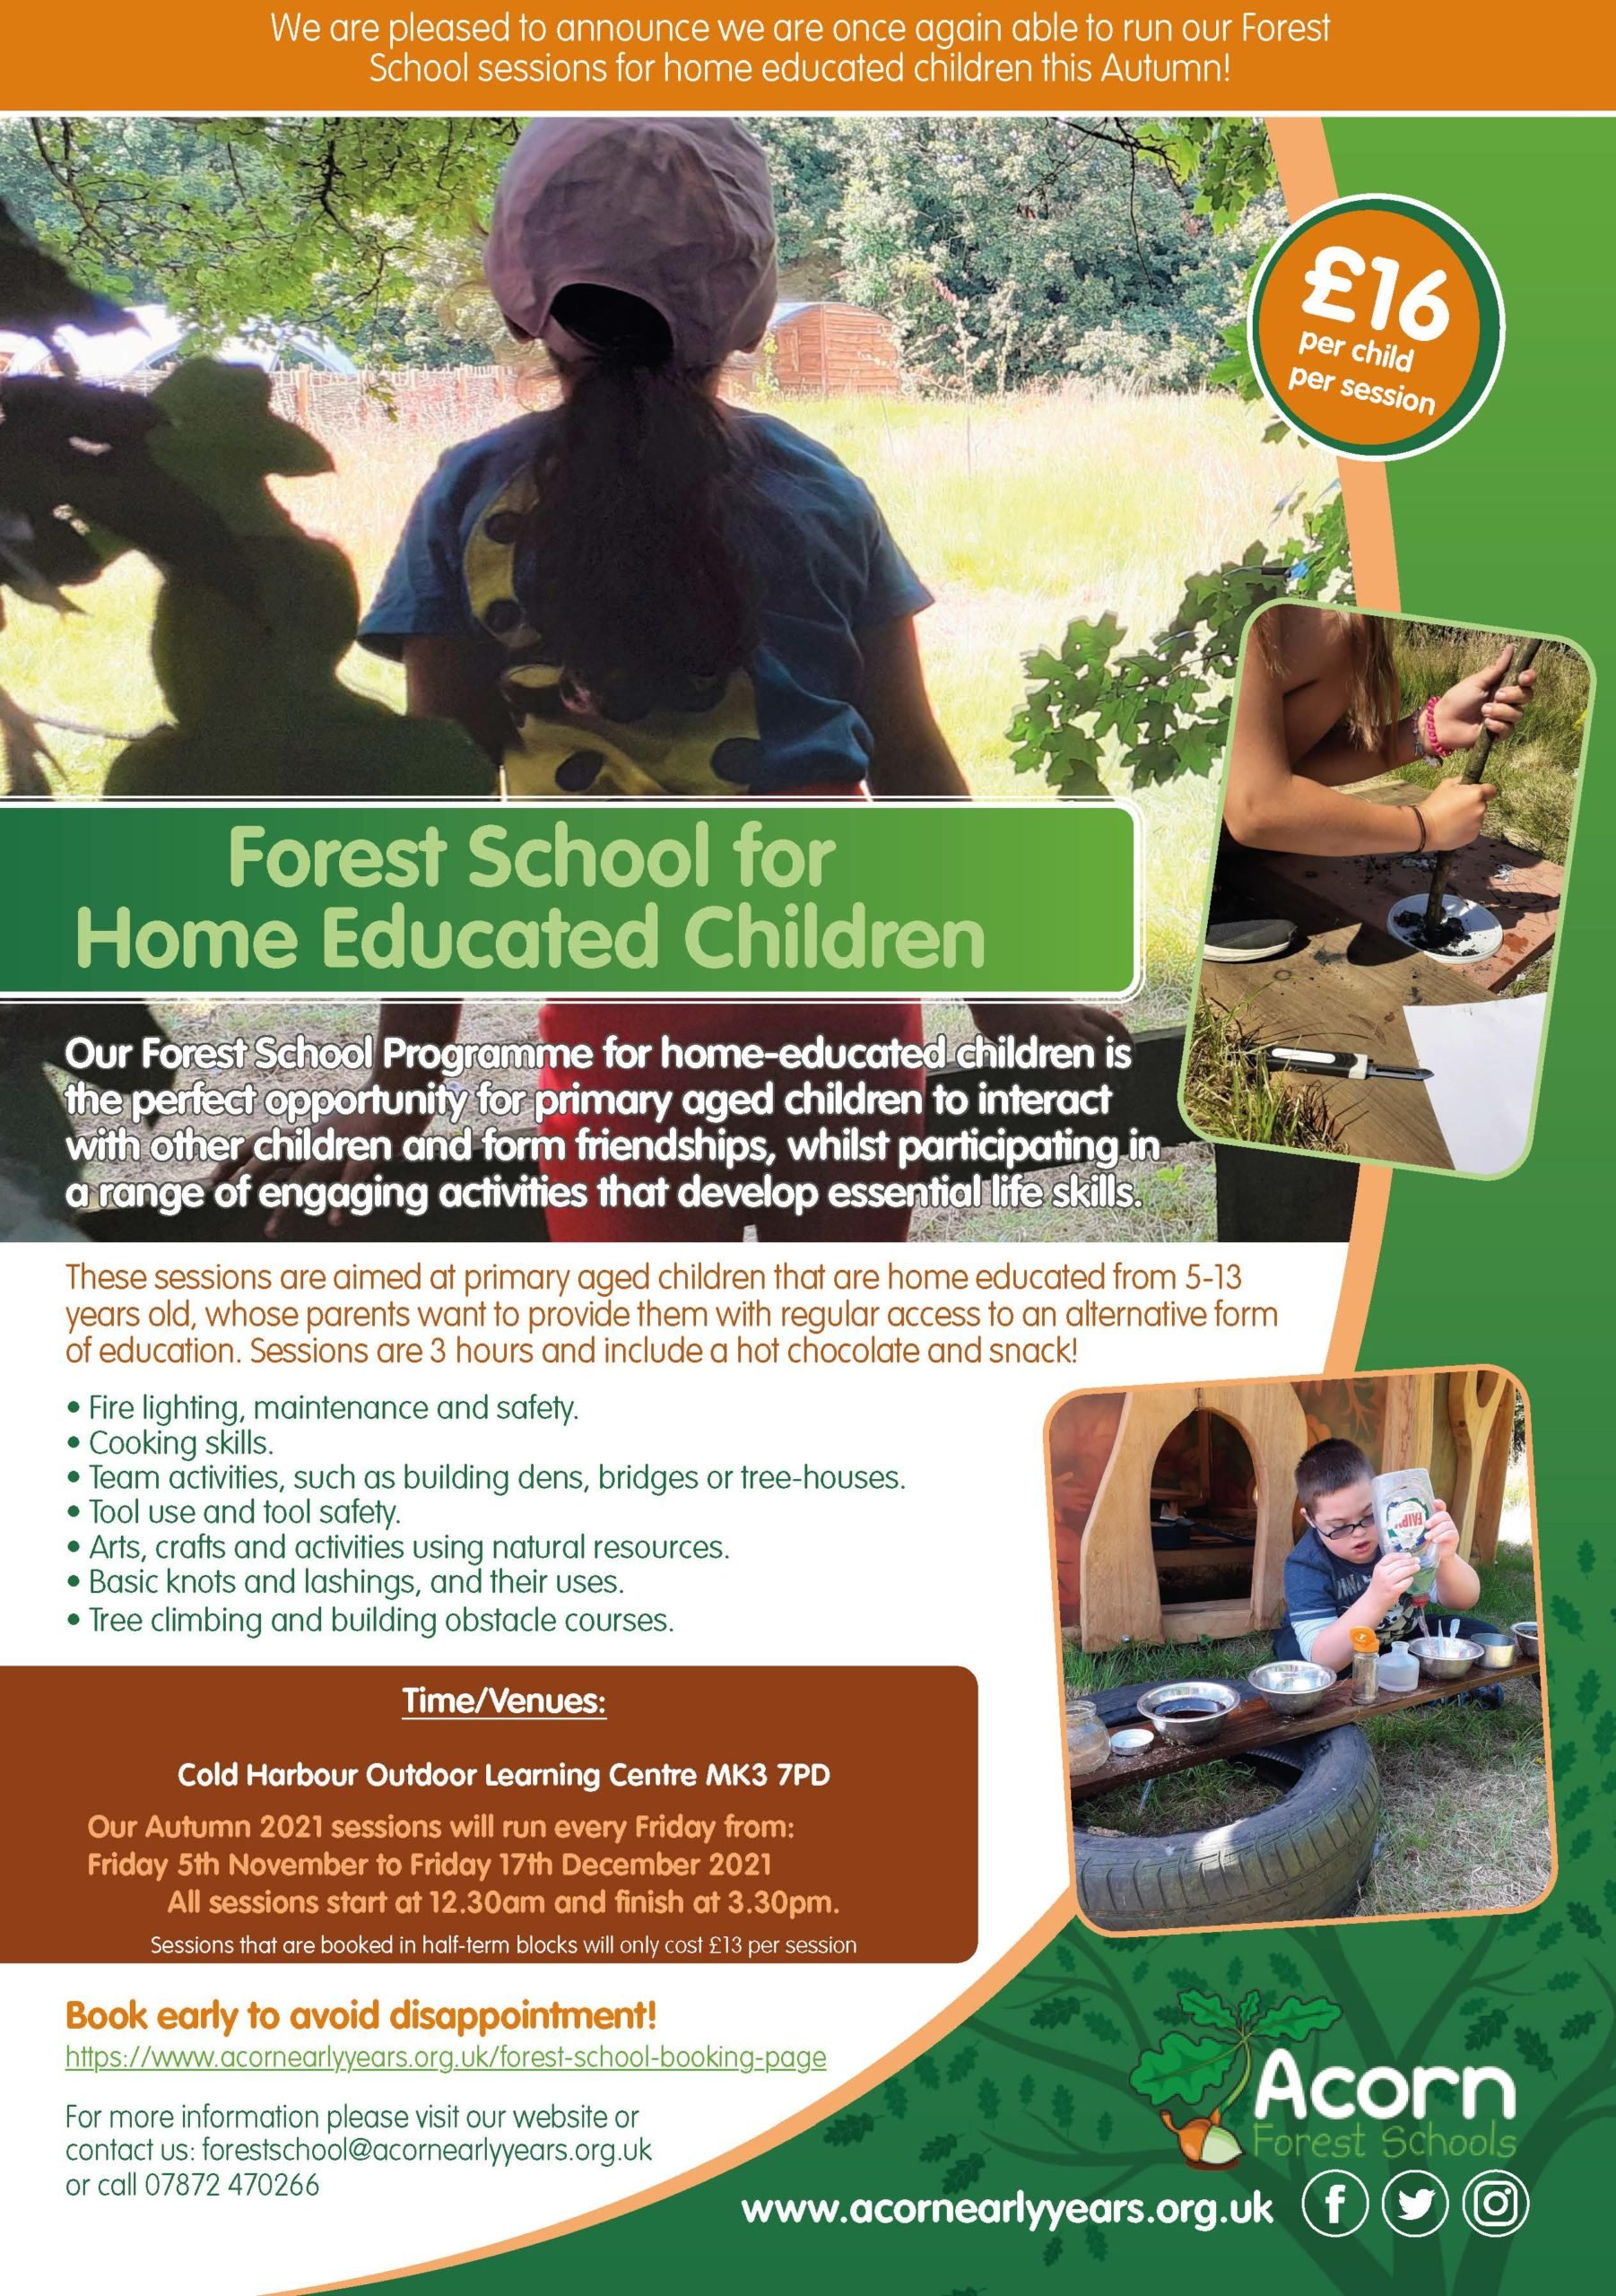 Acorns Forest School for Home Educated Children Top Image